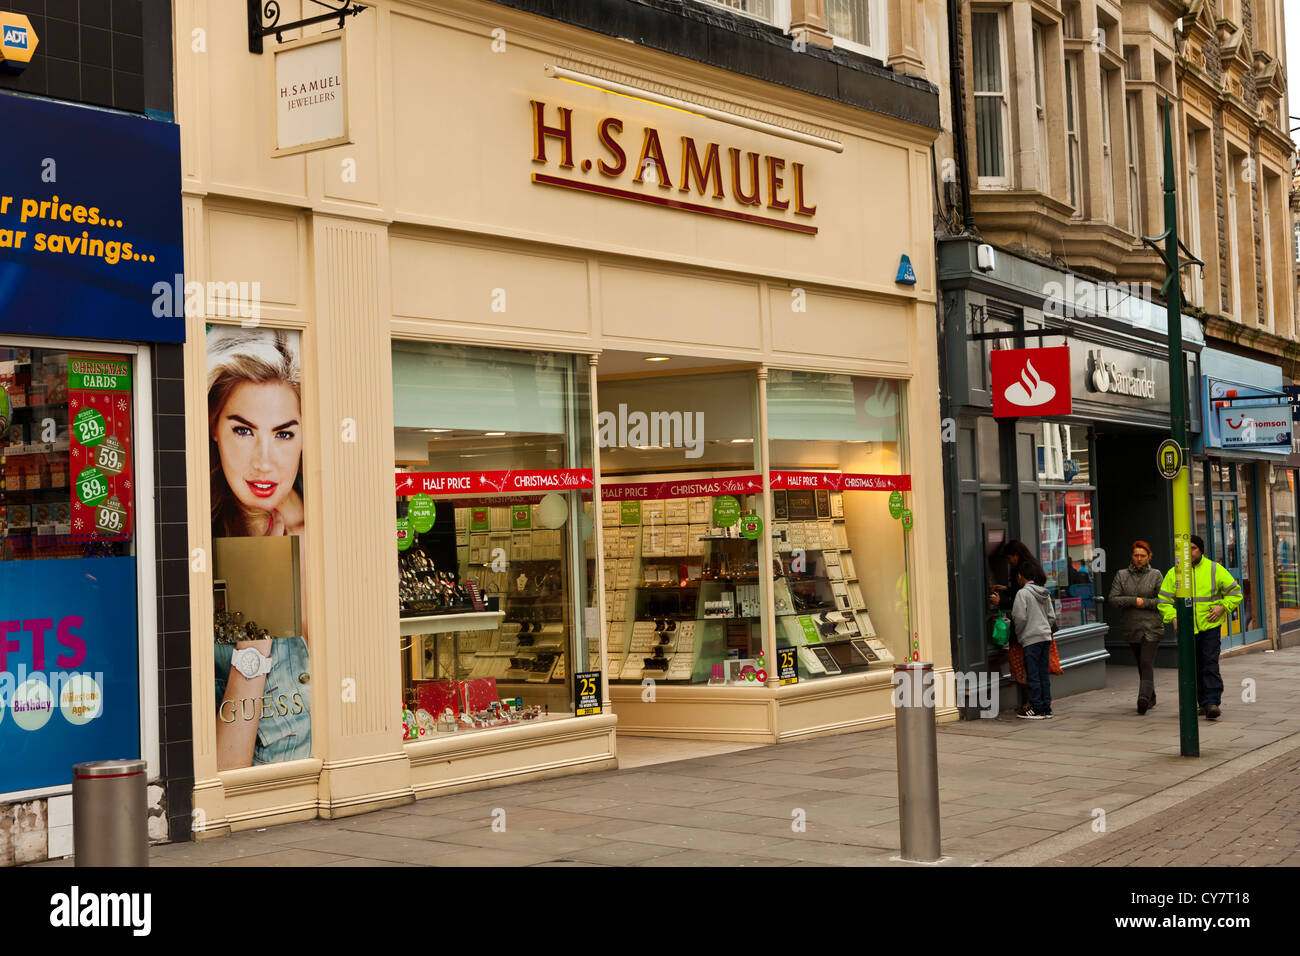 H Samuel the jewellers, largest retail jewellery shop store chain in the UK. Stock Photo